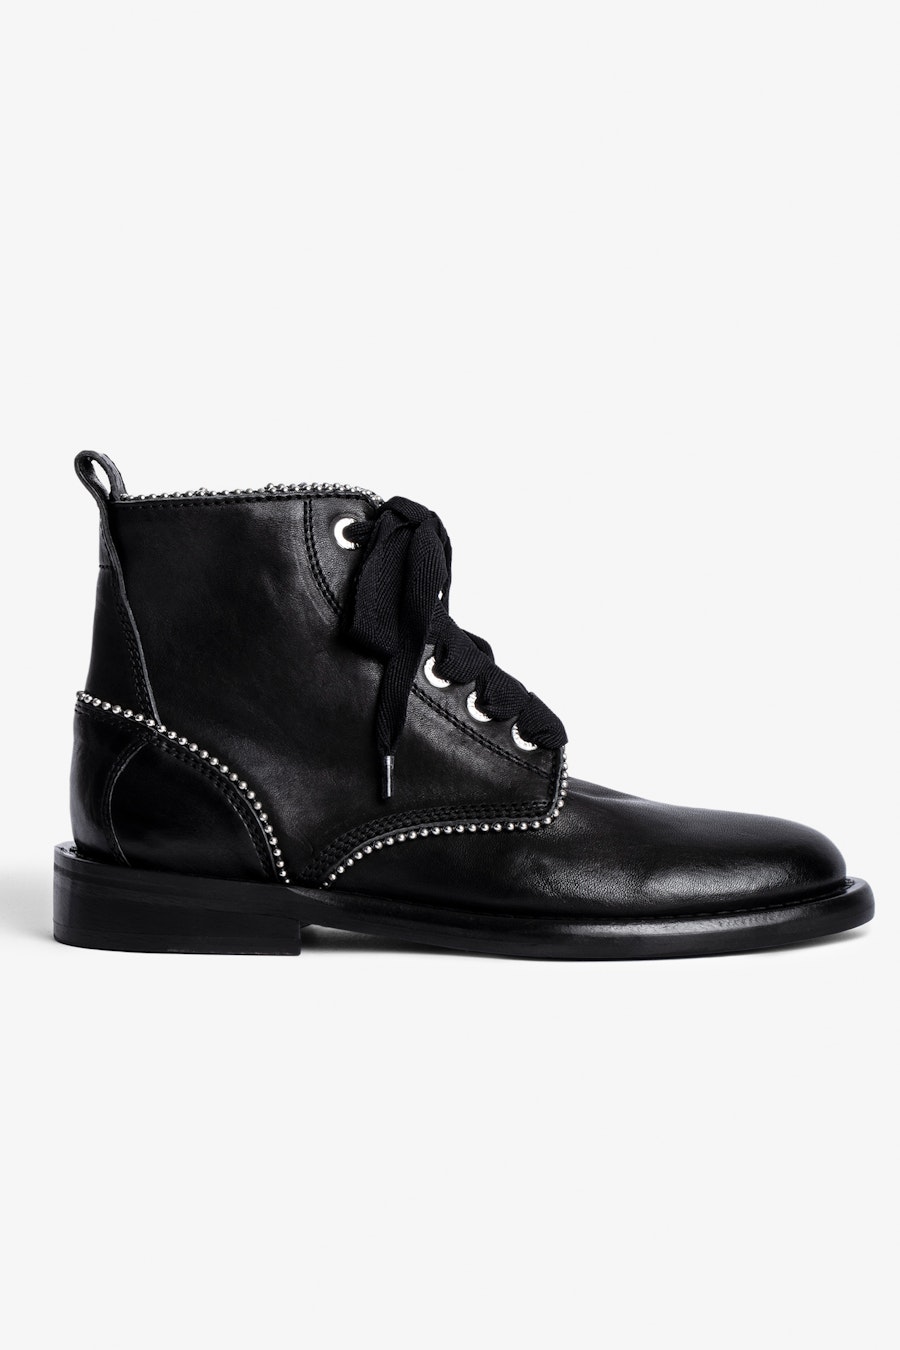 ZADIG&VOLTAIRE Laureen Roma Studs Ankle Boots